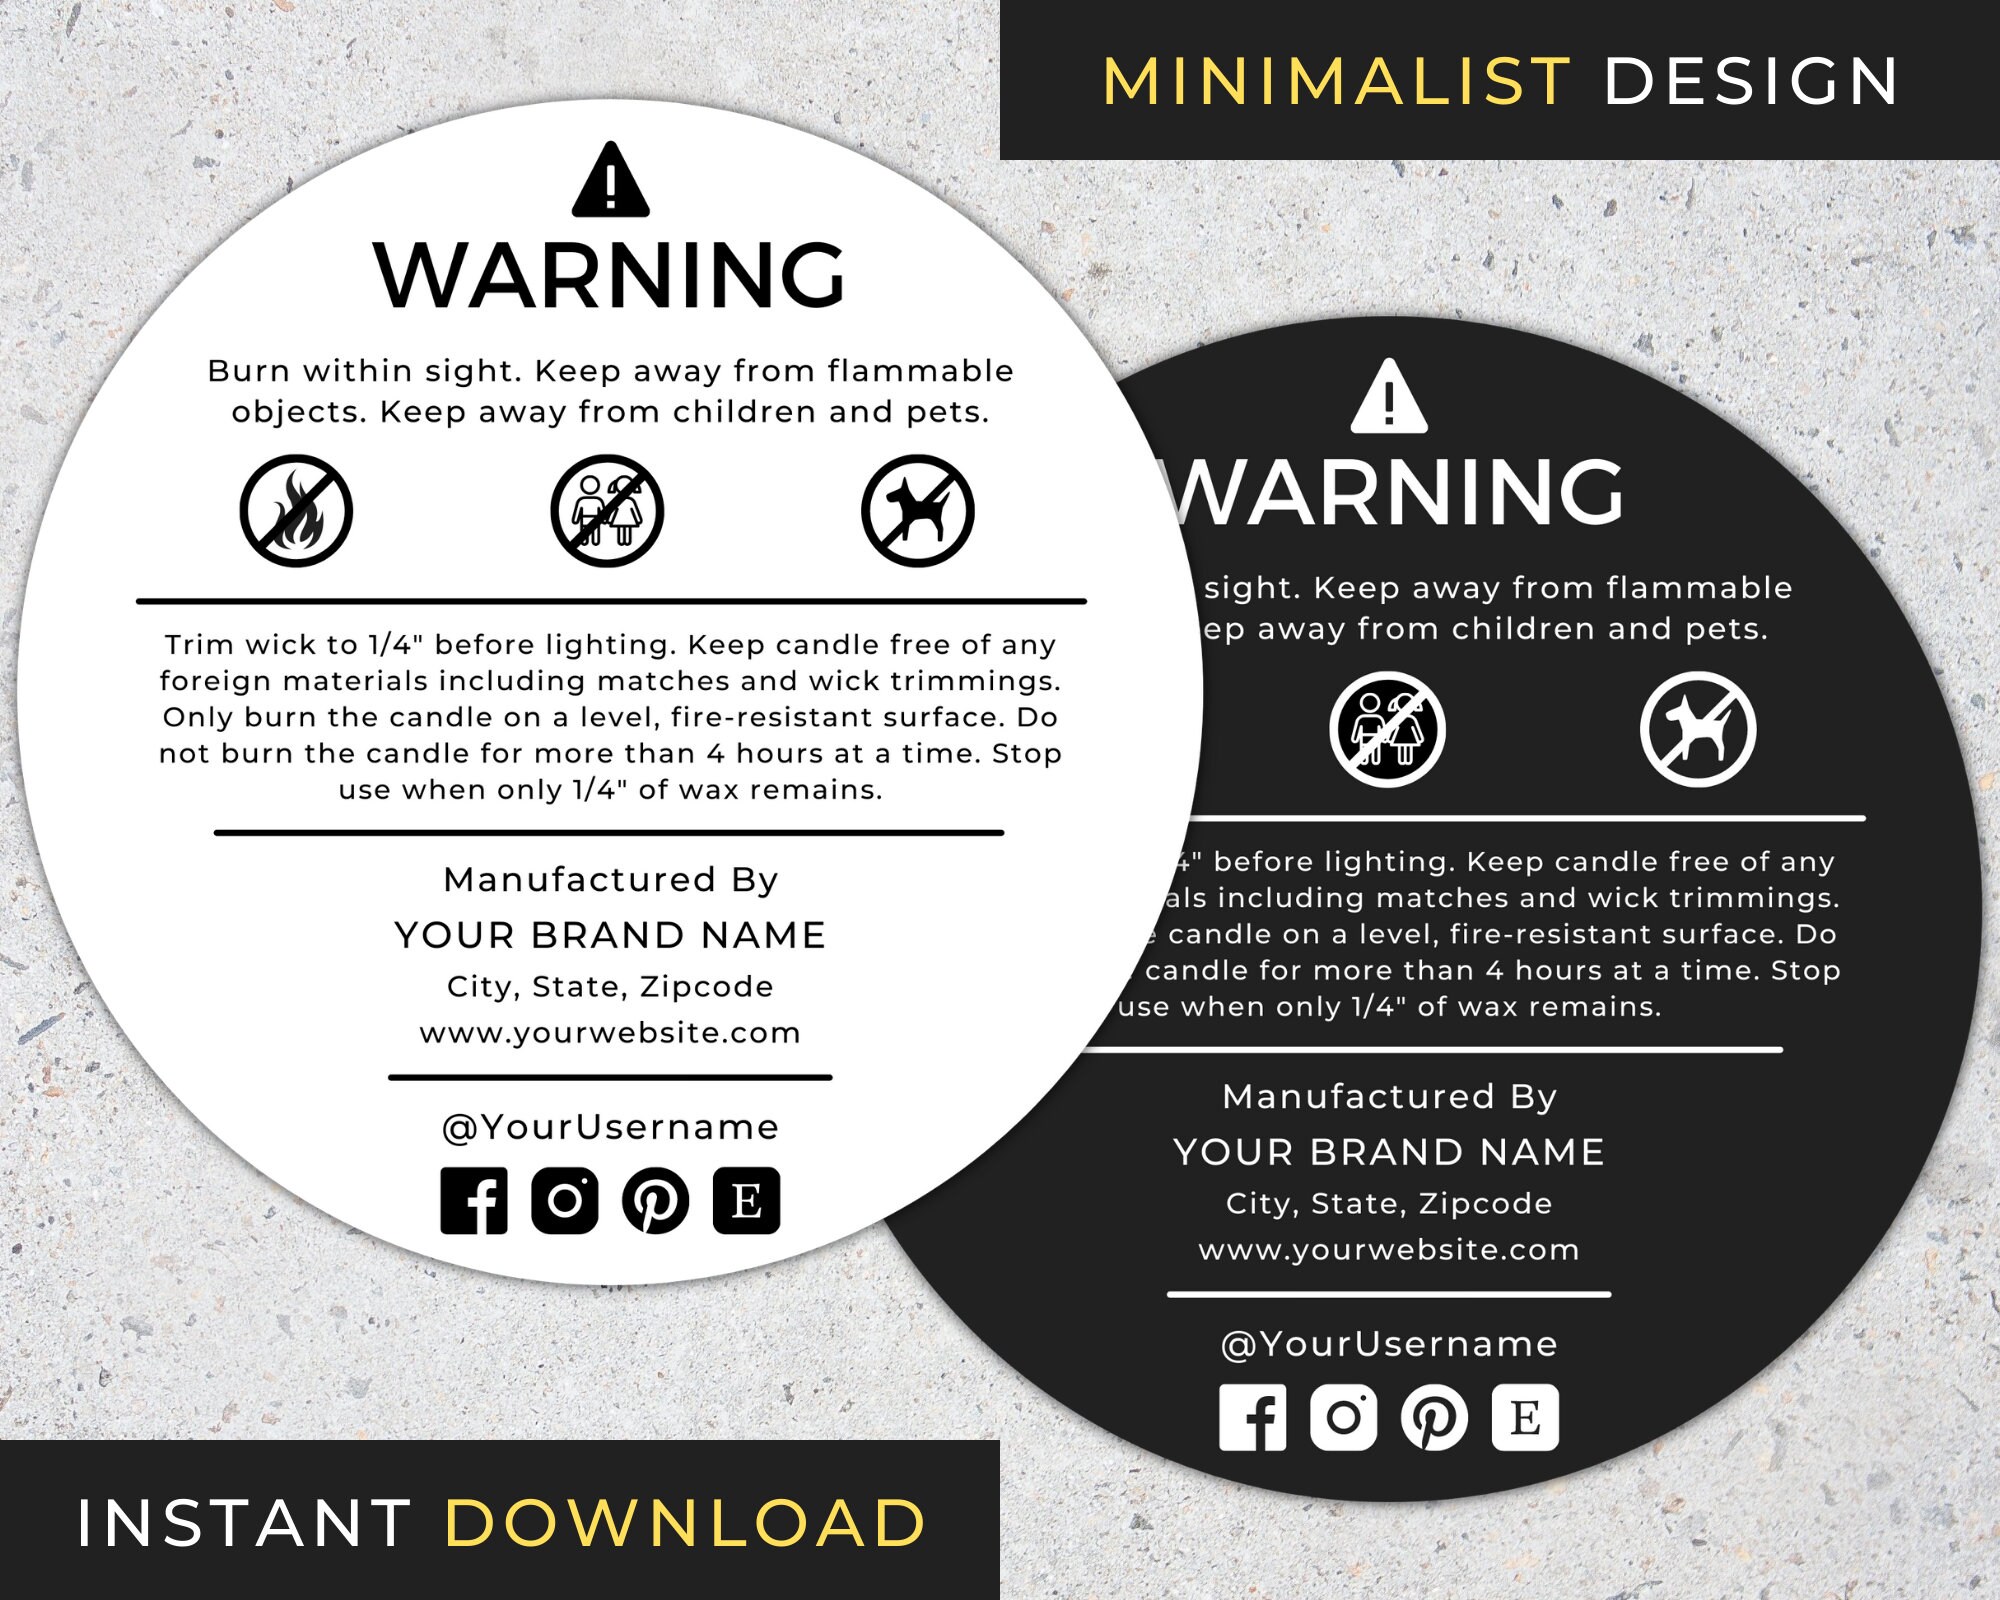 OL1905 - 1.75 x 1.25 - Candle Warning Labels  Label templates, Candle  label template, Candle labels design